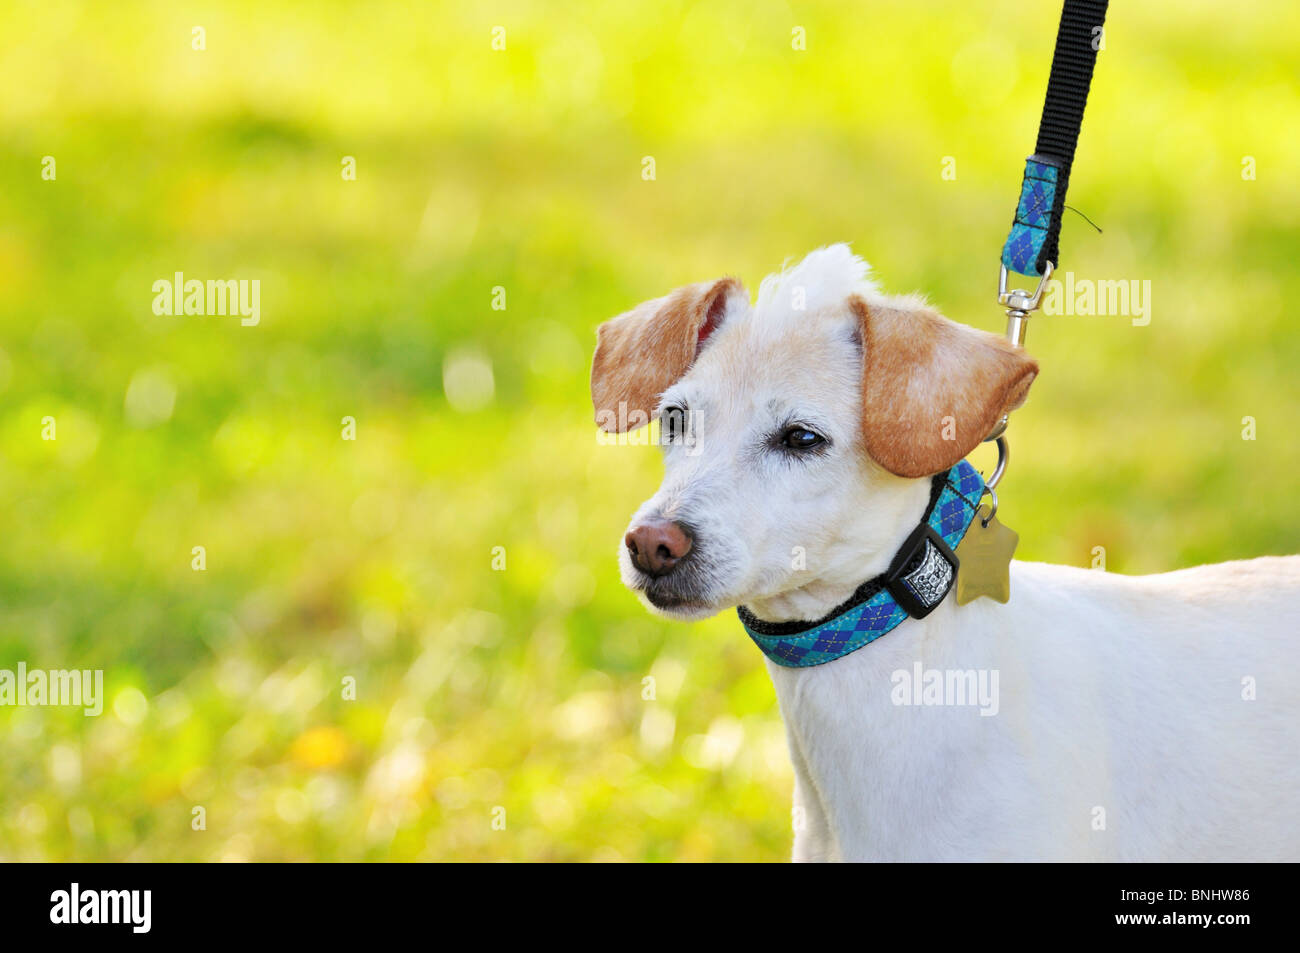 A small dog with a Mohawk on a leash, dog also bears a name tag. Shot at dusk. Stock Photo